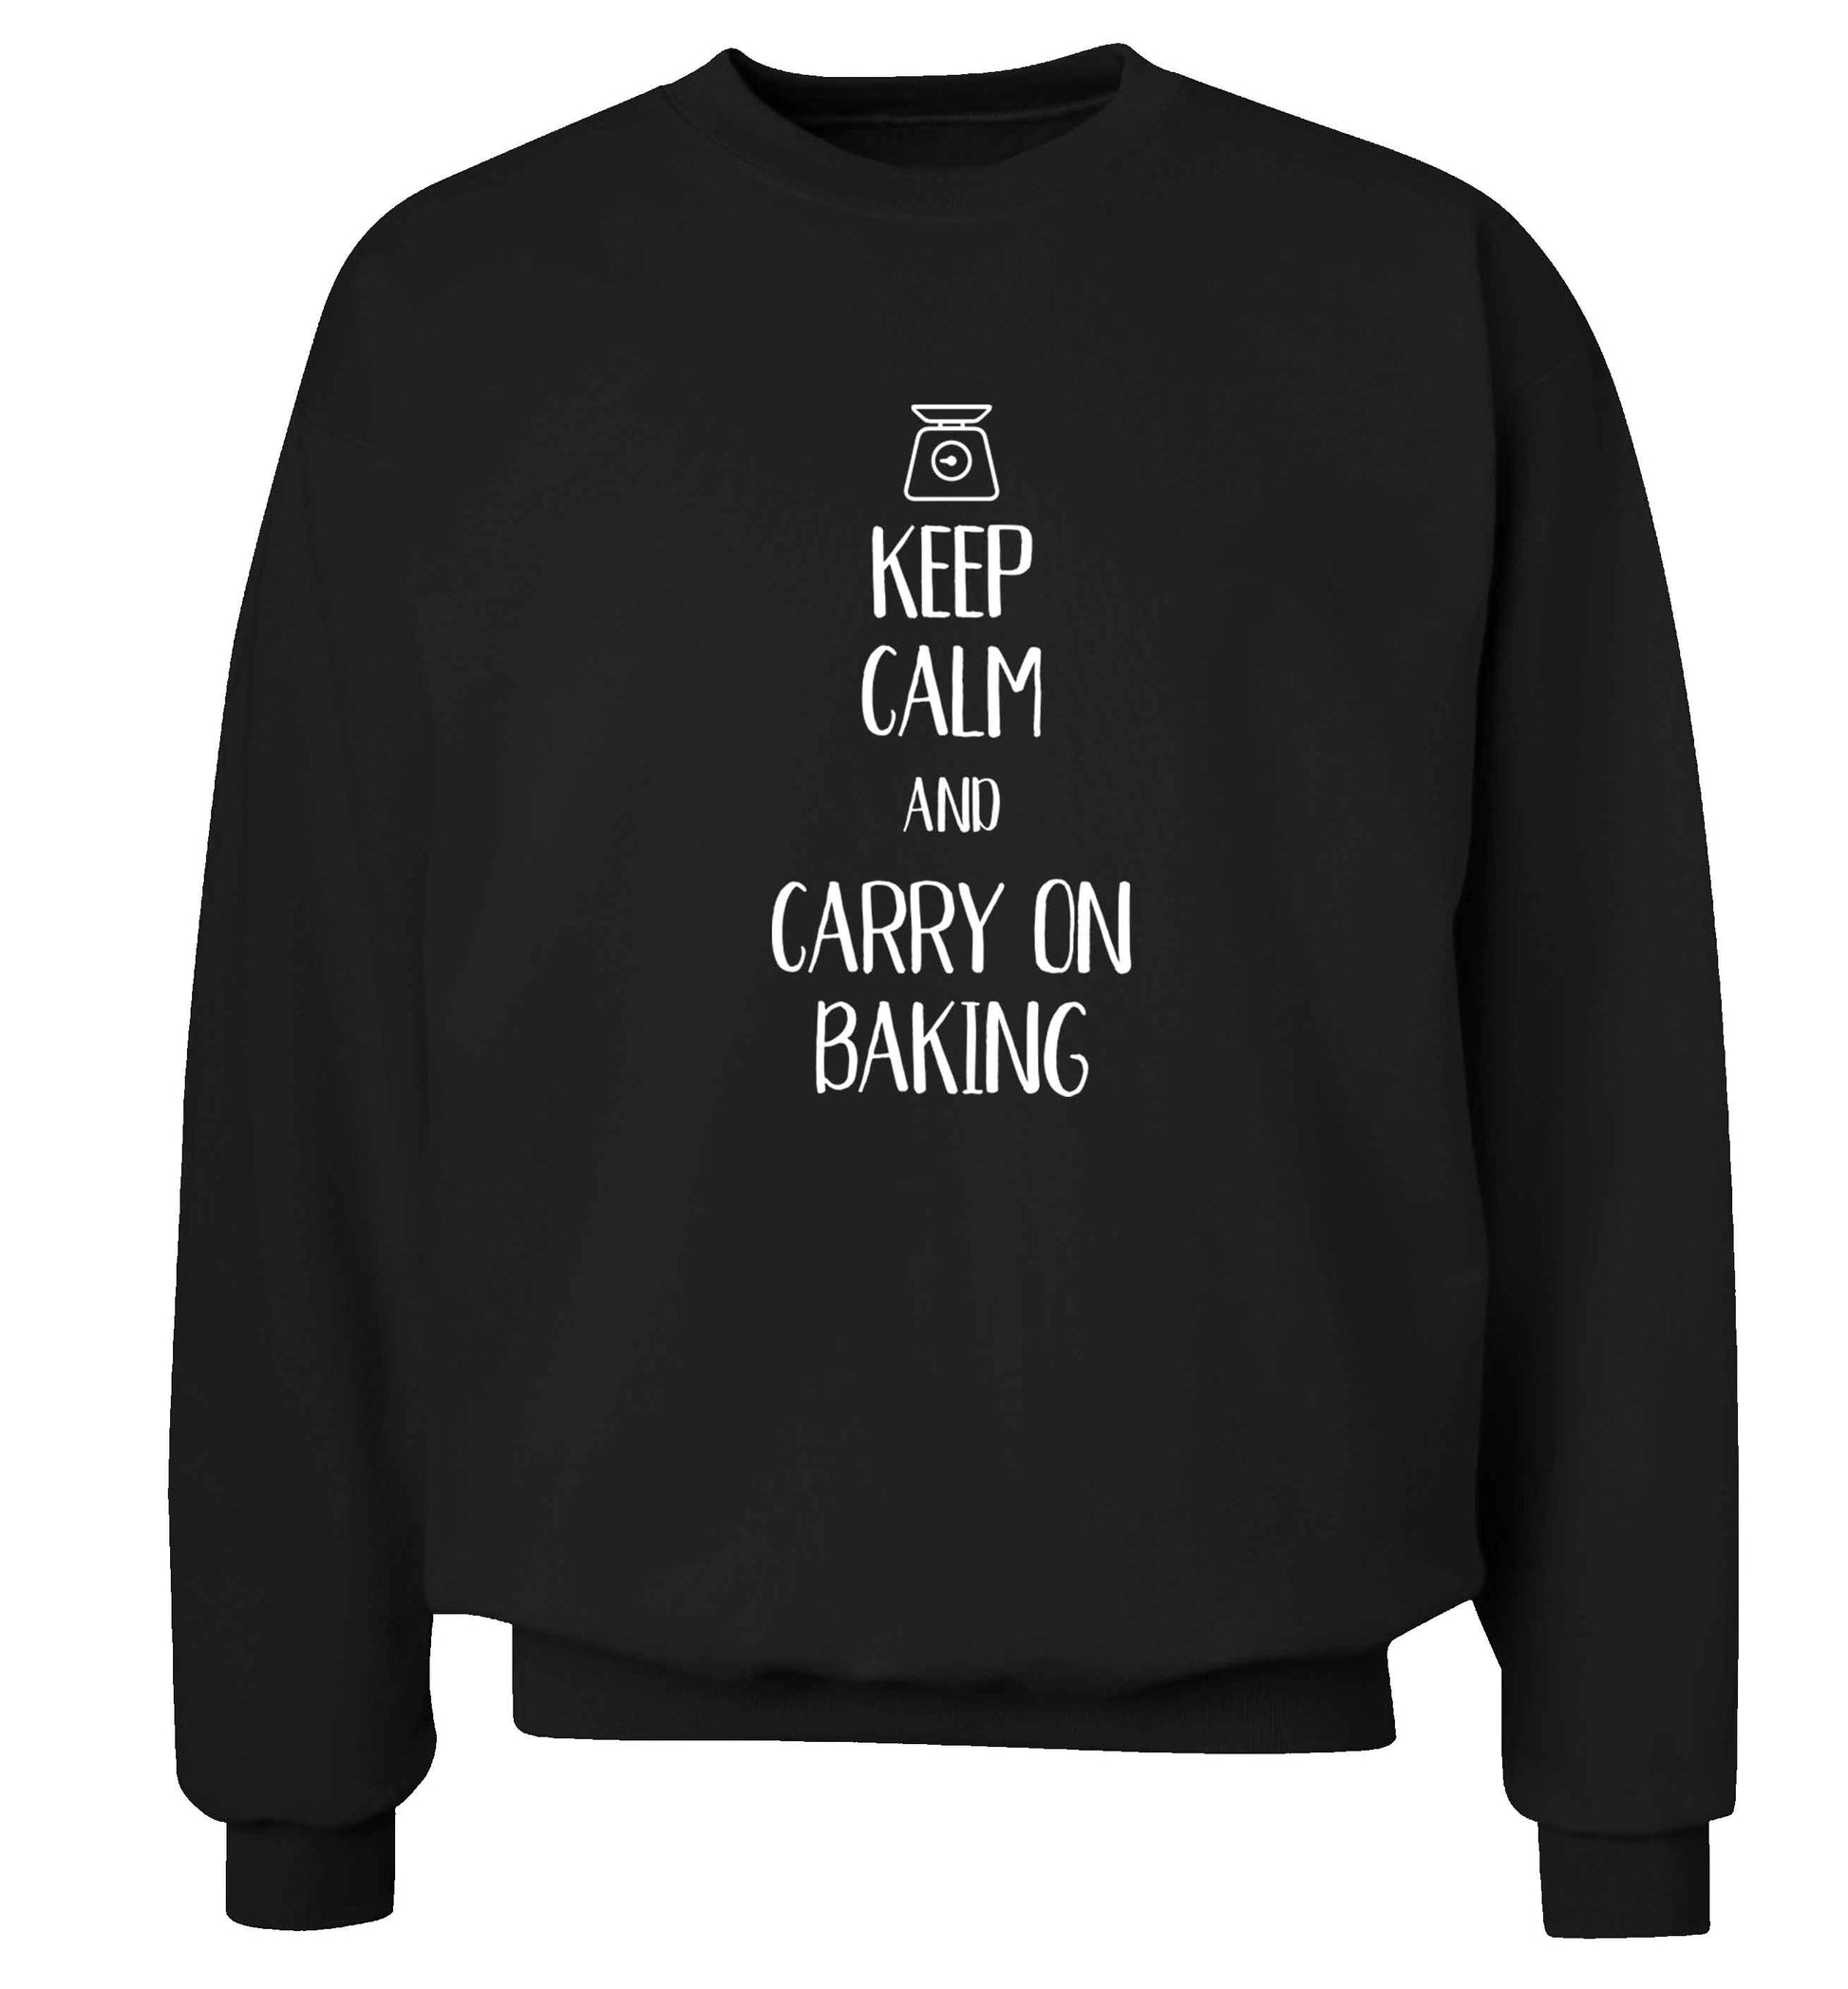 Keep calm and carry on baking Adult's unisex black Sweater 2XL